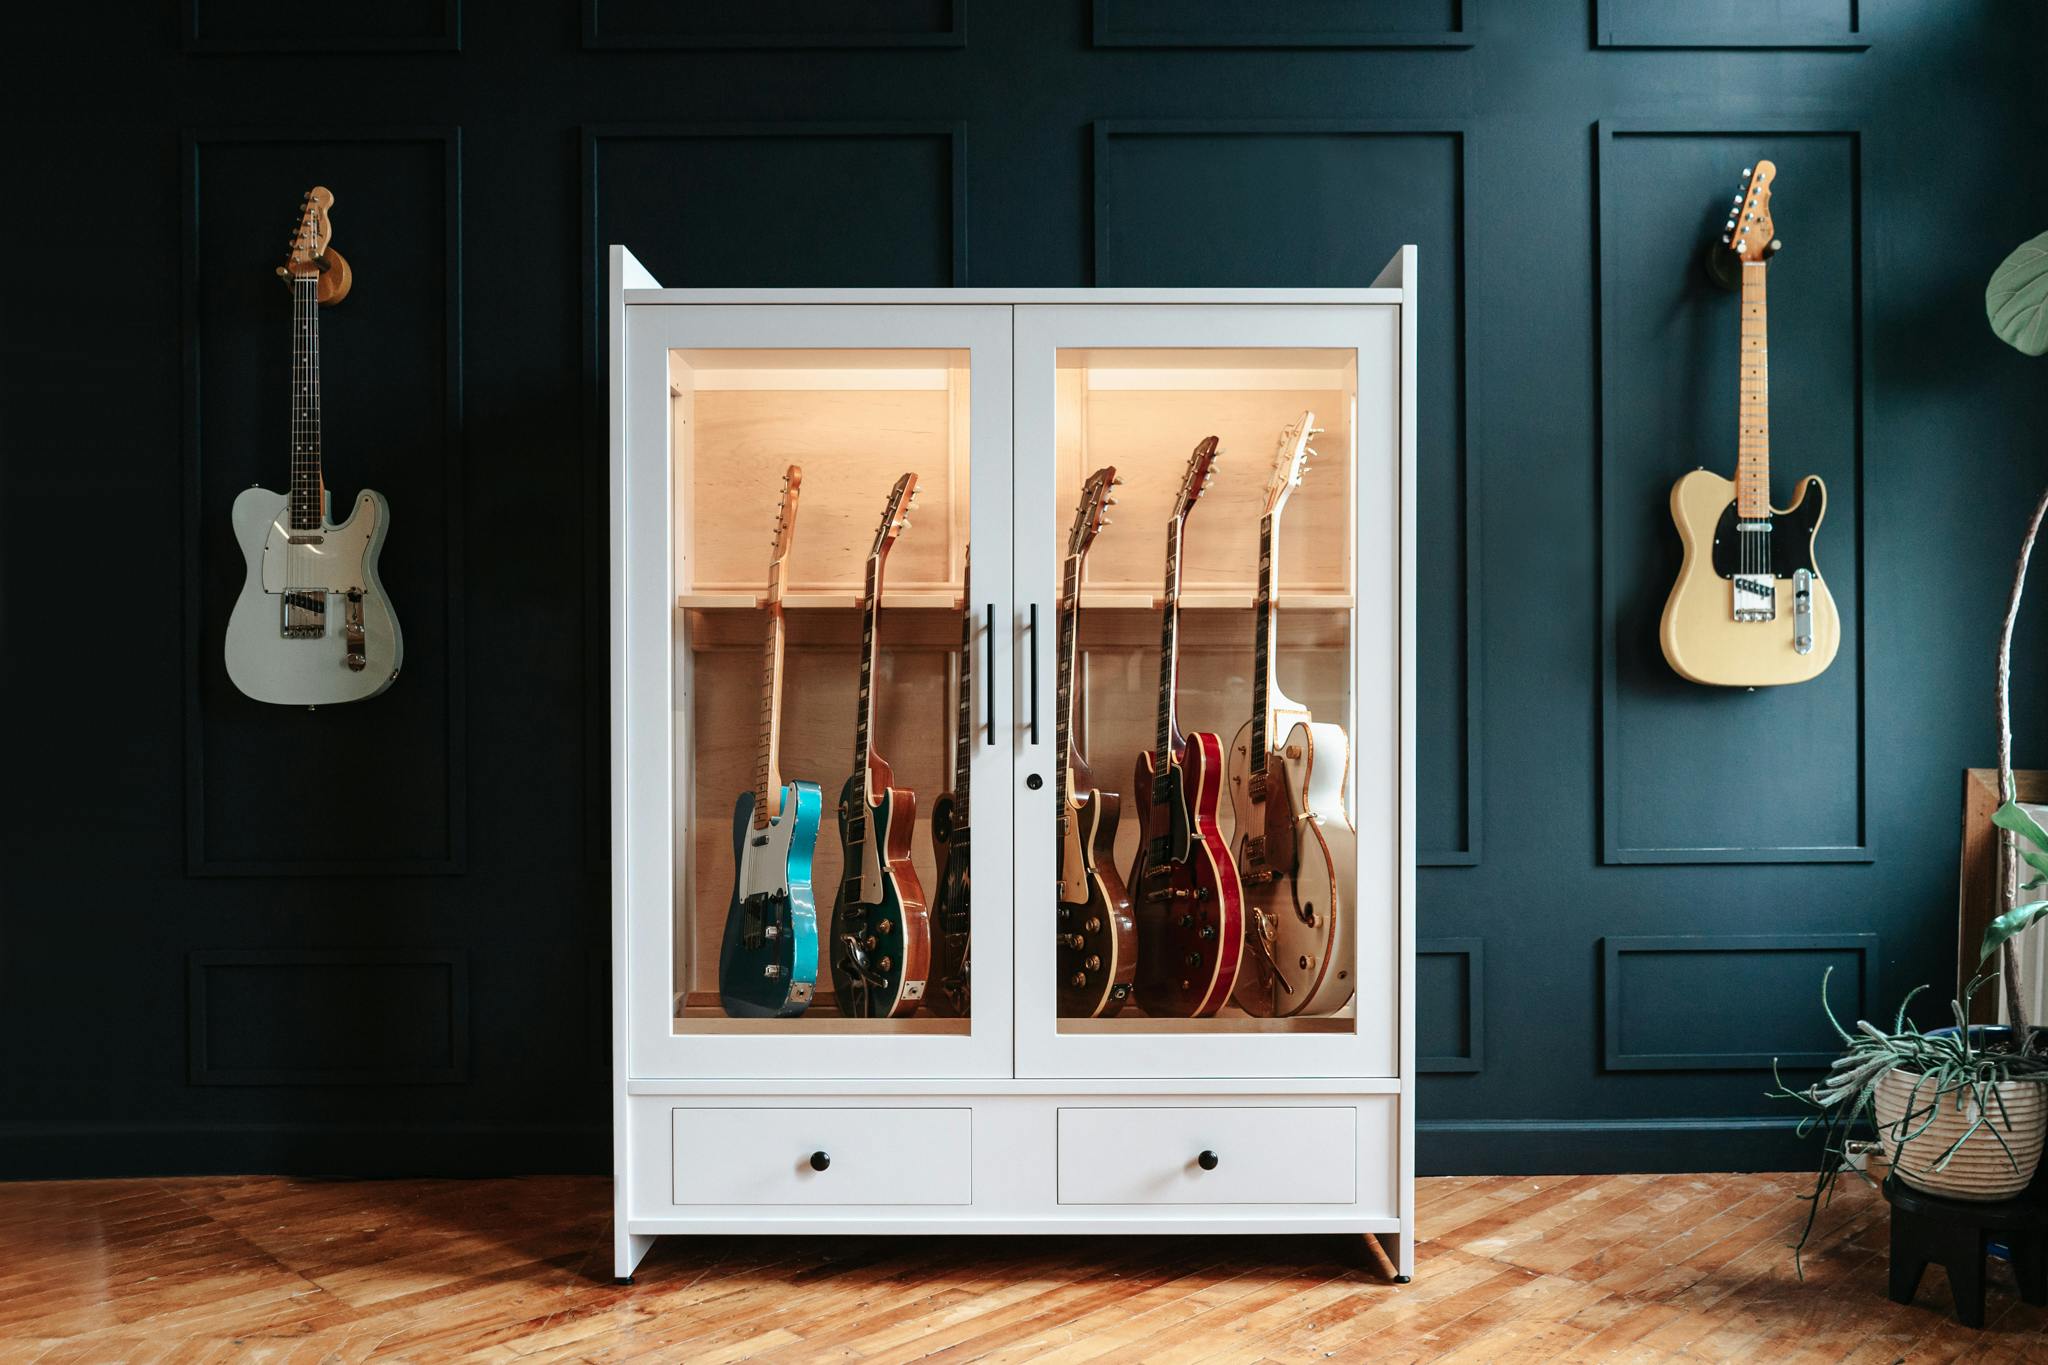 hyla guitar wall mounts and guitar humidifier display cabinet from american music furniture